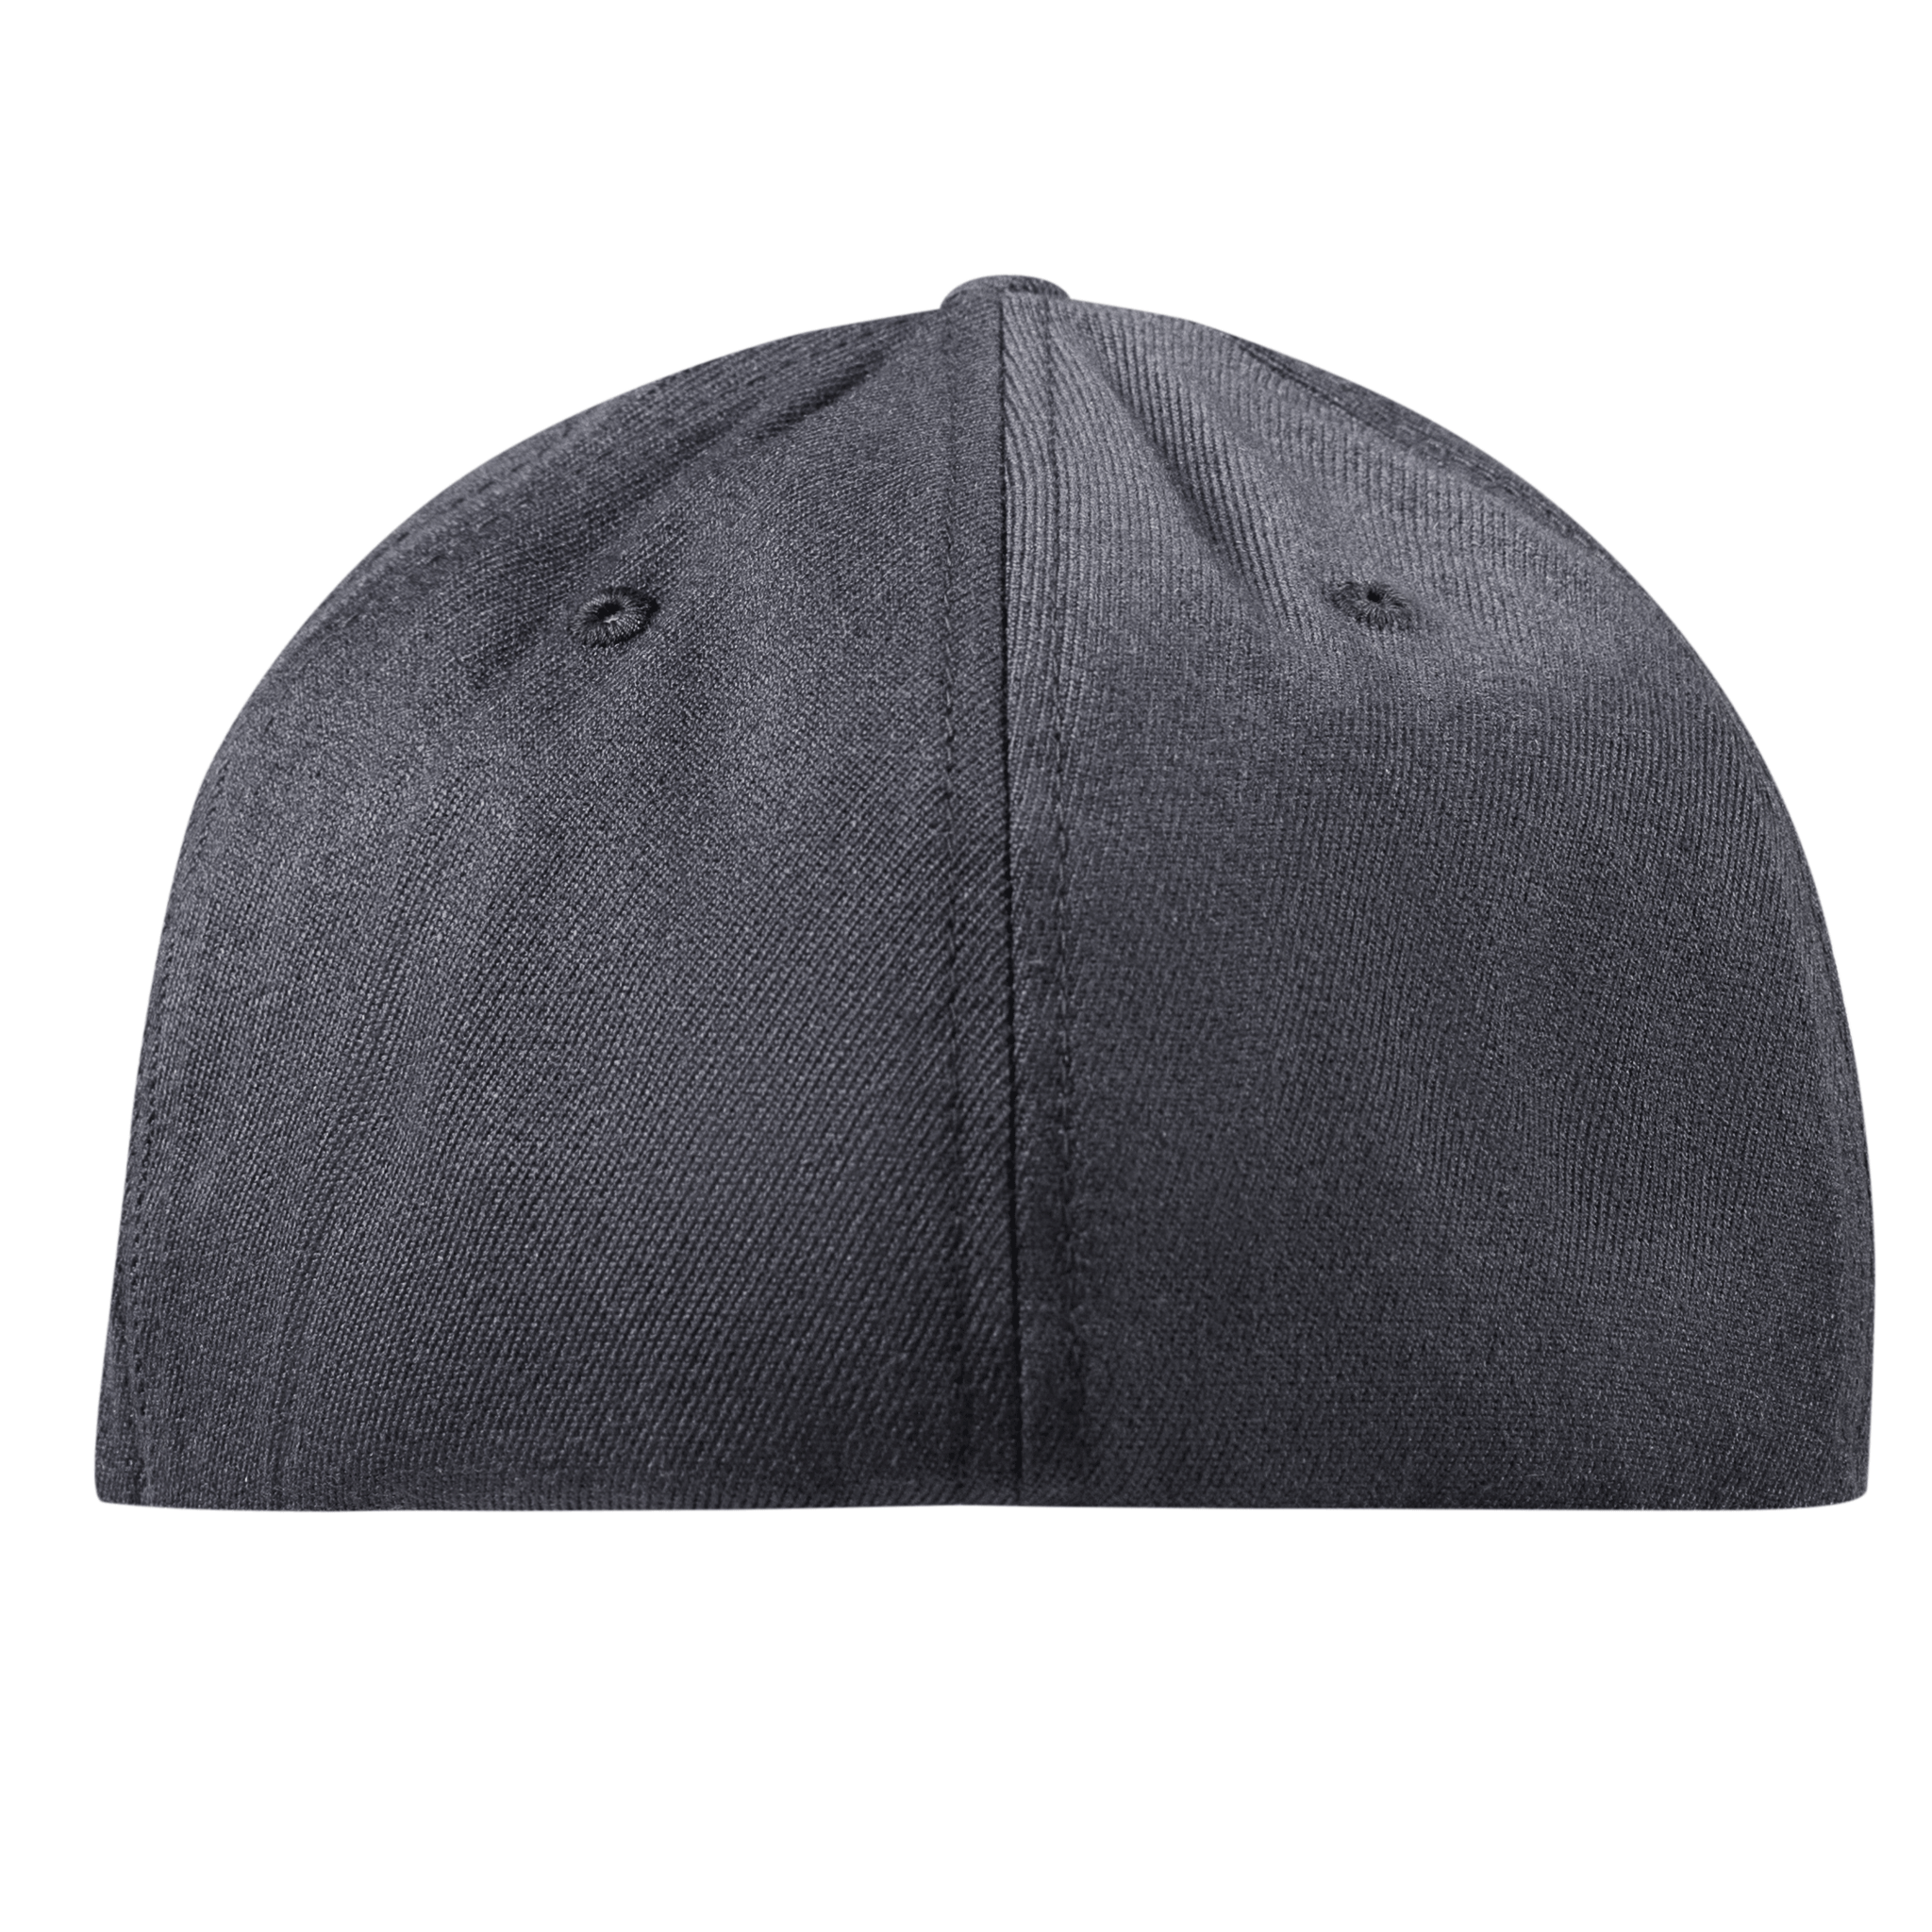 Old Glory Flexfit Fitted Back Charcoal